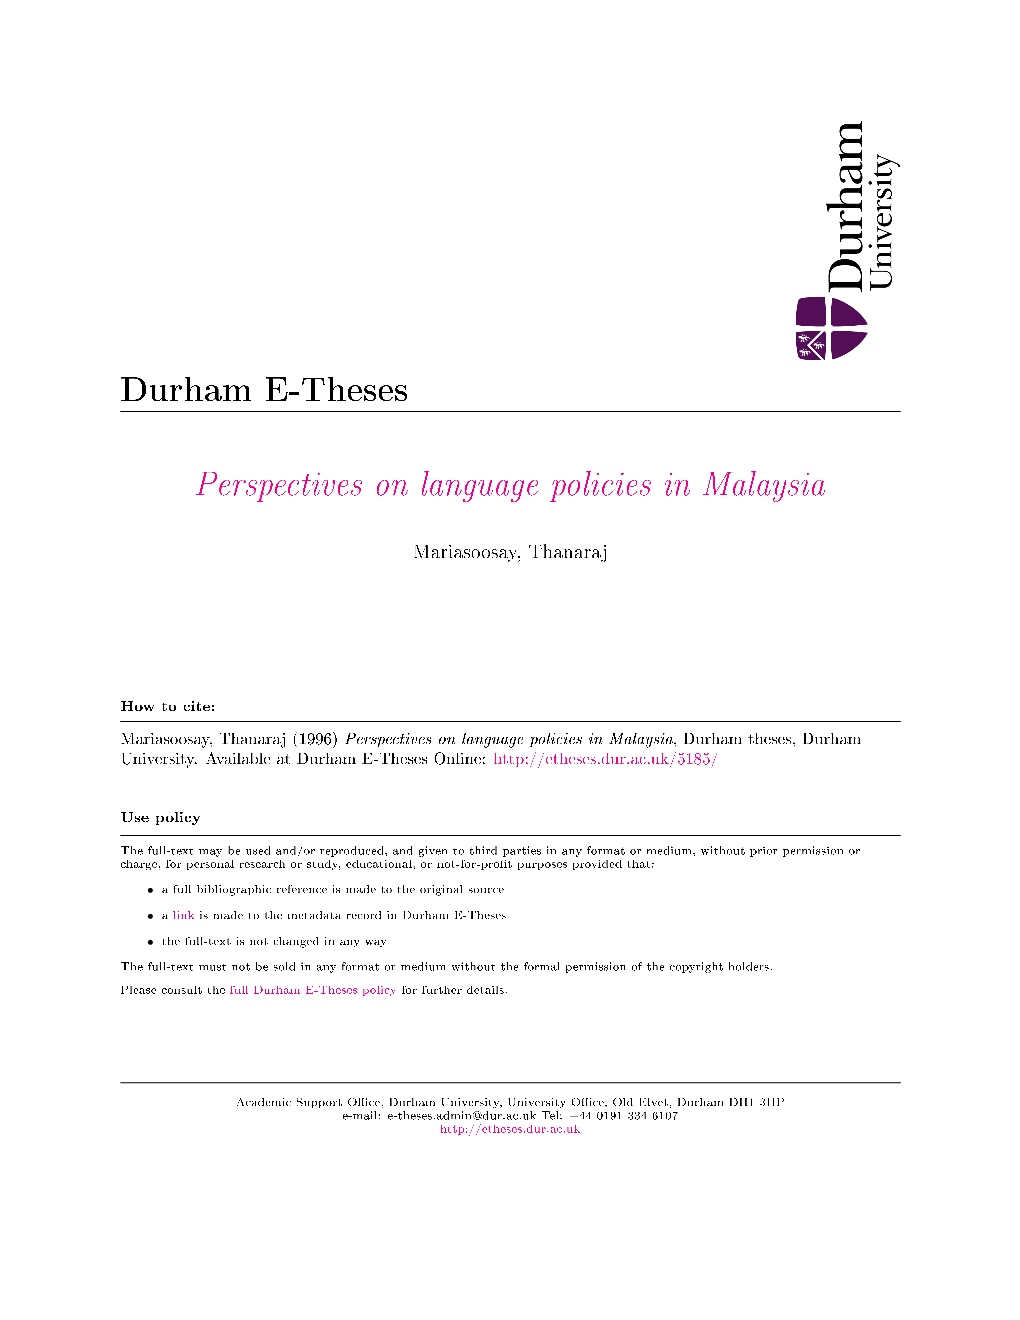 Perspectives on Language Policies in Malaysia